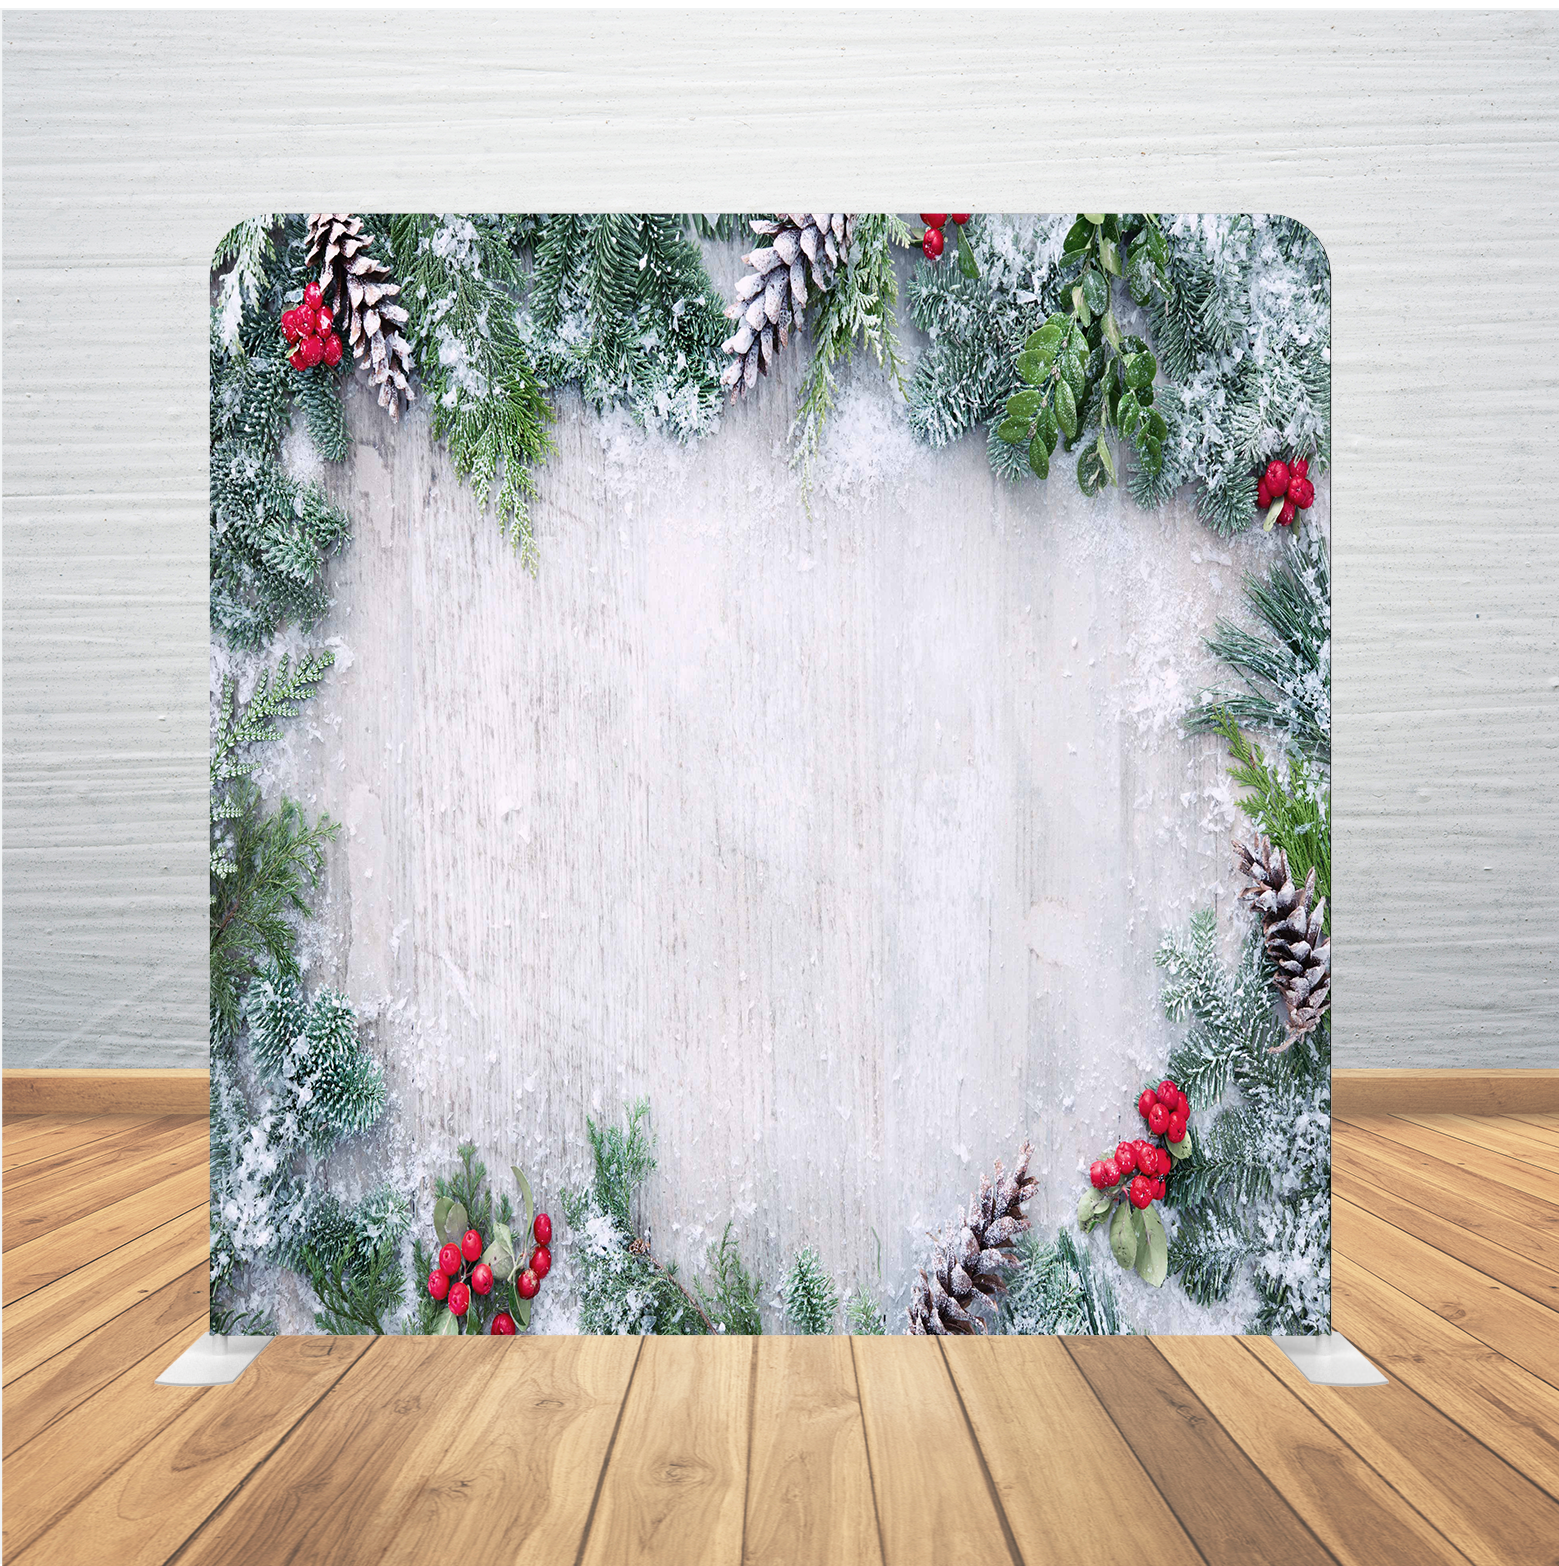 8X8 Pillowcase Tension Backdrop- Frosty Holidays